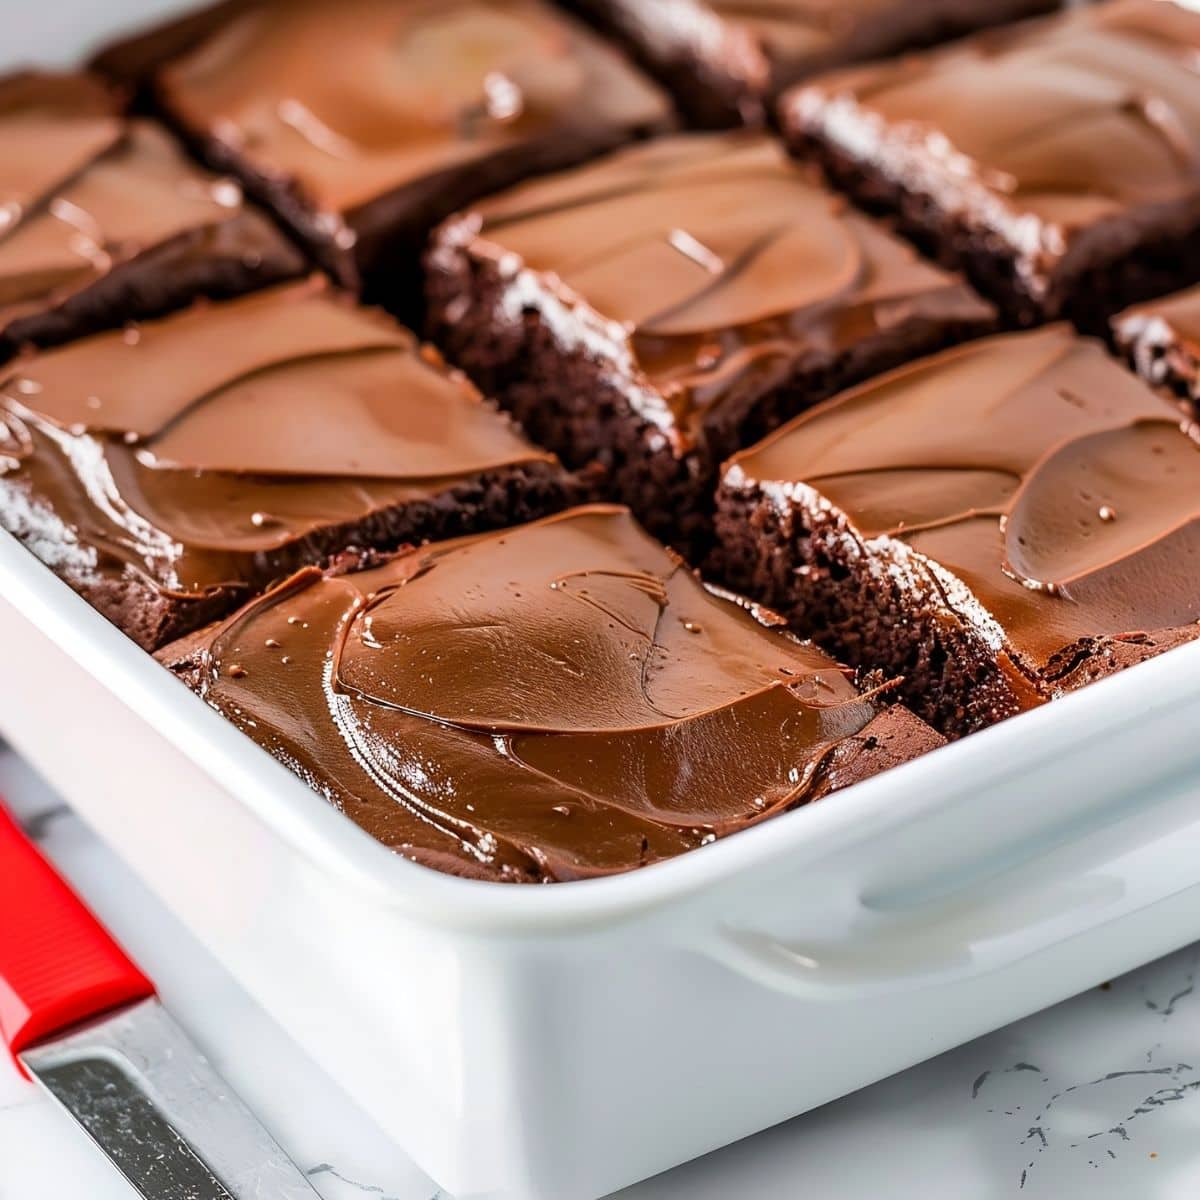 Coca Cola Cake in the Baking Dish, Cut into Slices